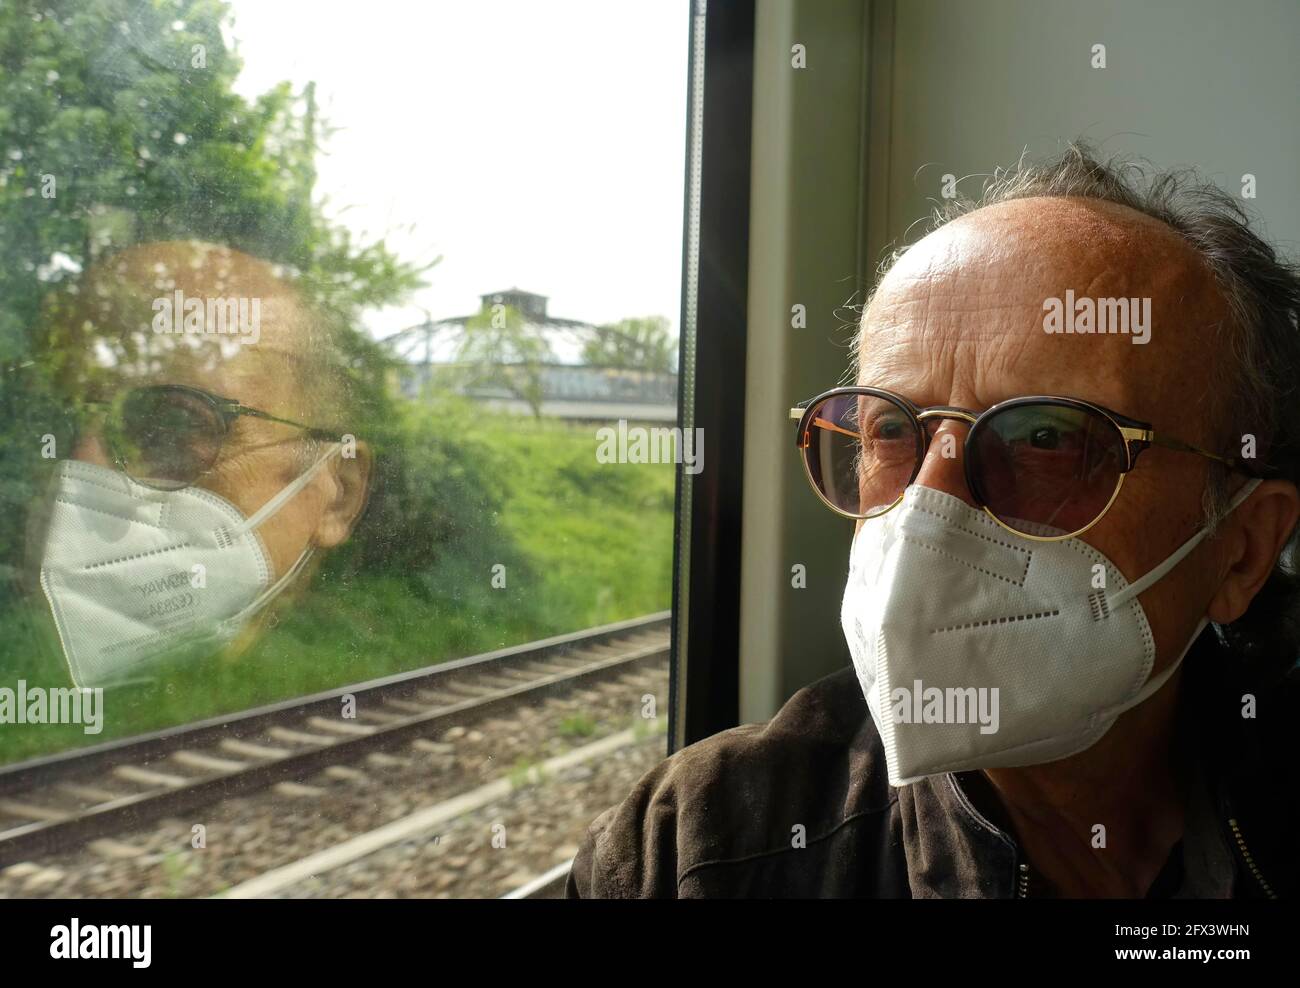 65-year-old man with facial mask on the train, Berlin Stock Photo